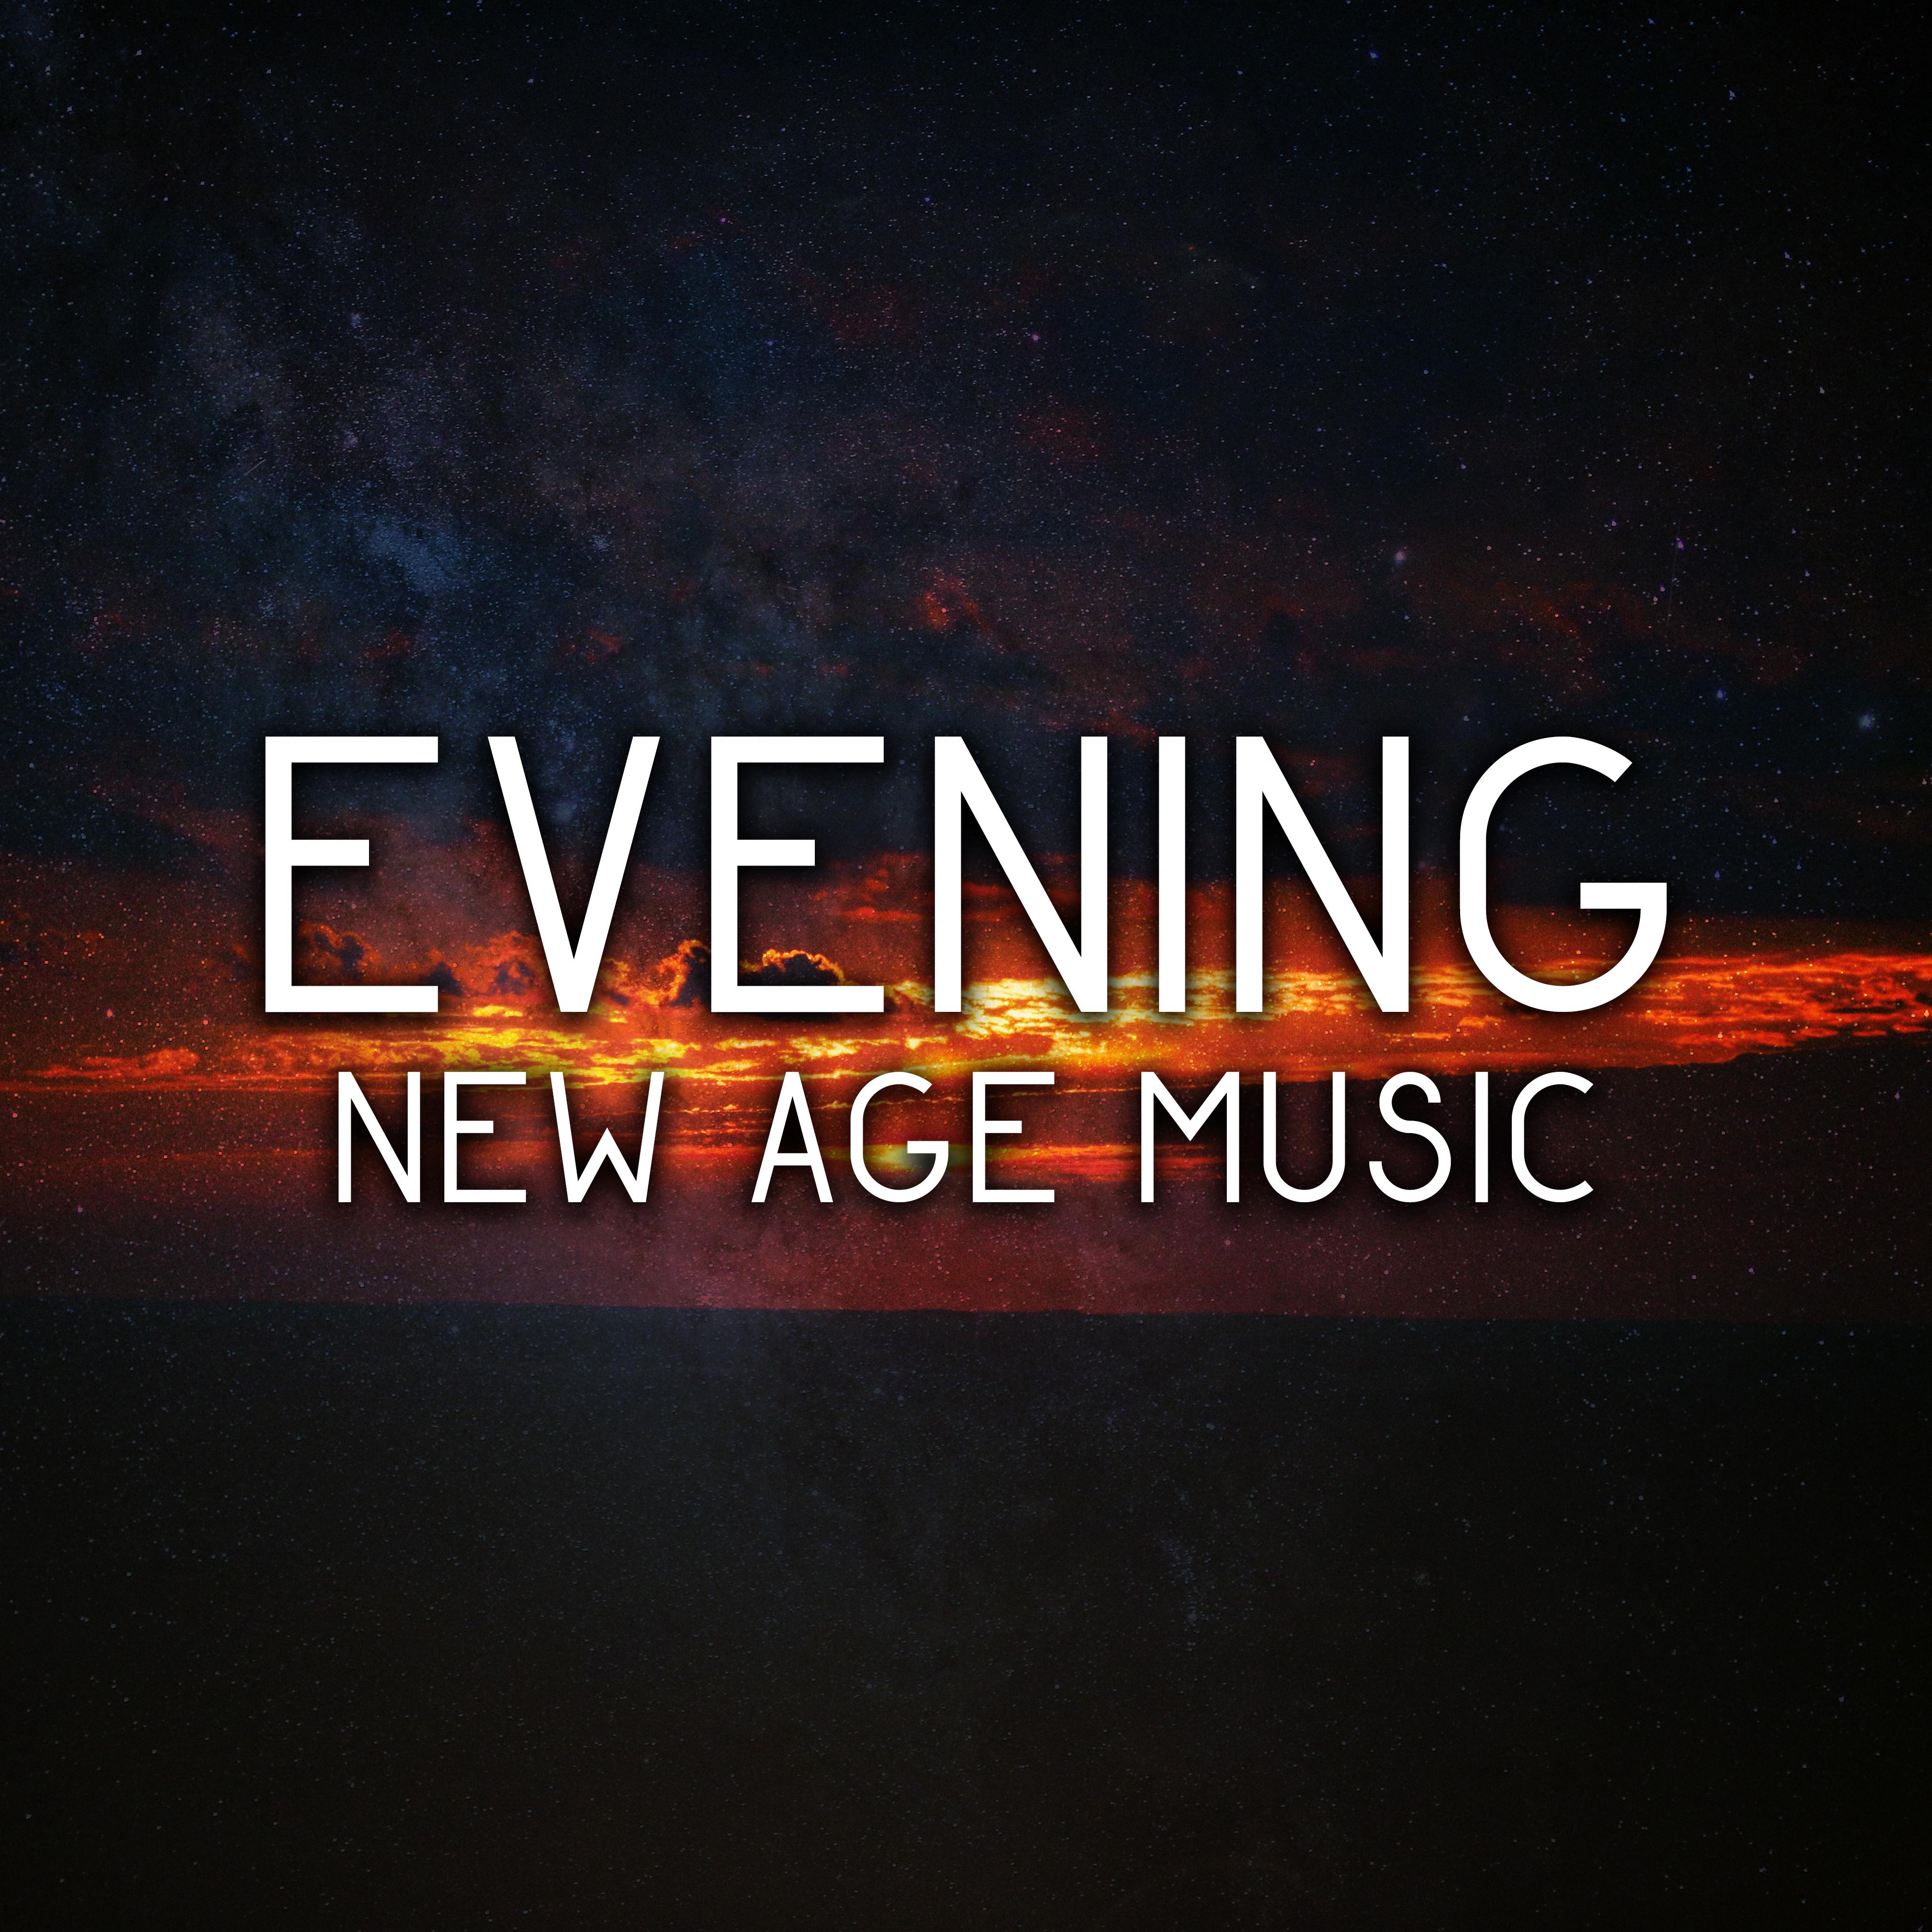 Evening New Age Music – Soft Melodies to Relax, Rest a Bit, Stress Relief, Peaceful Sounds